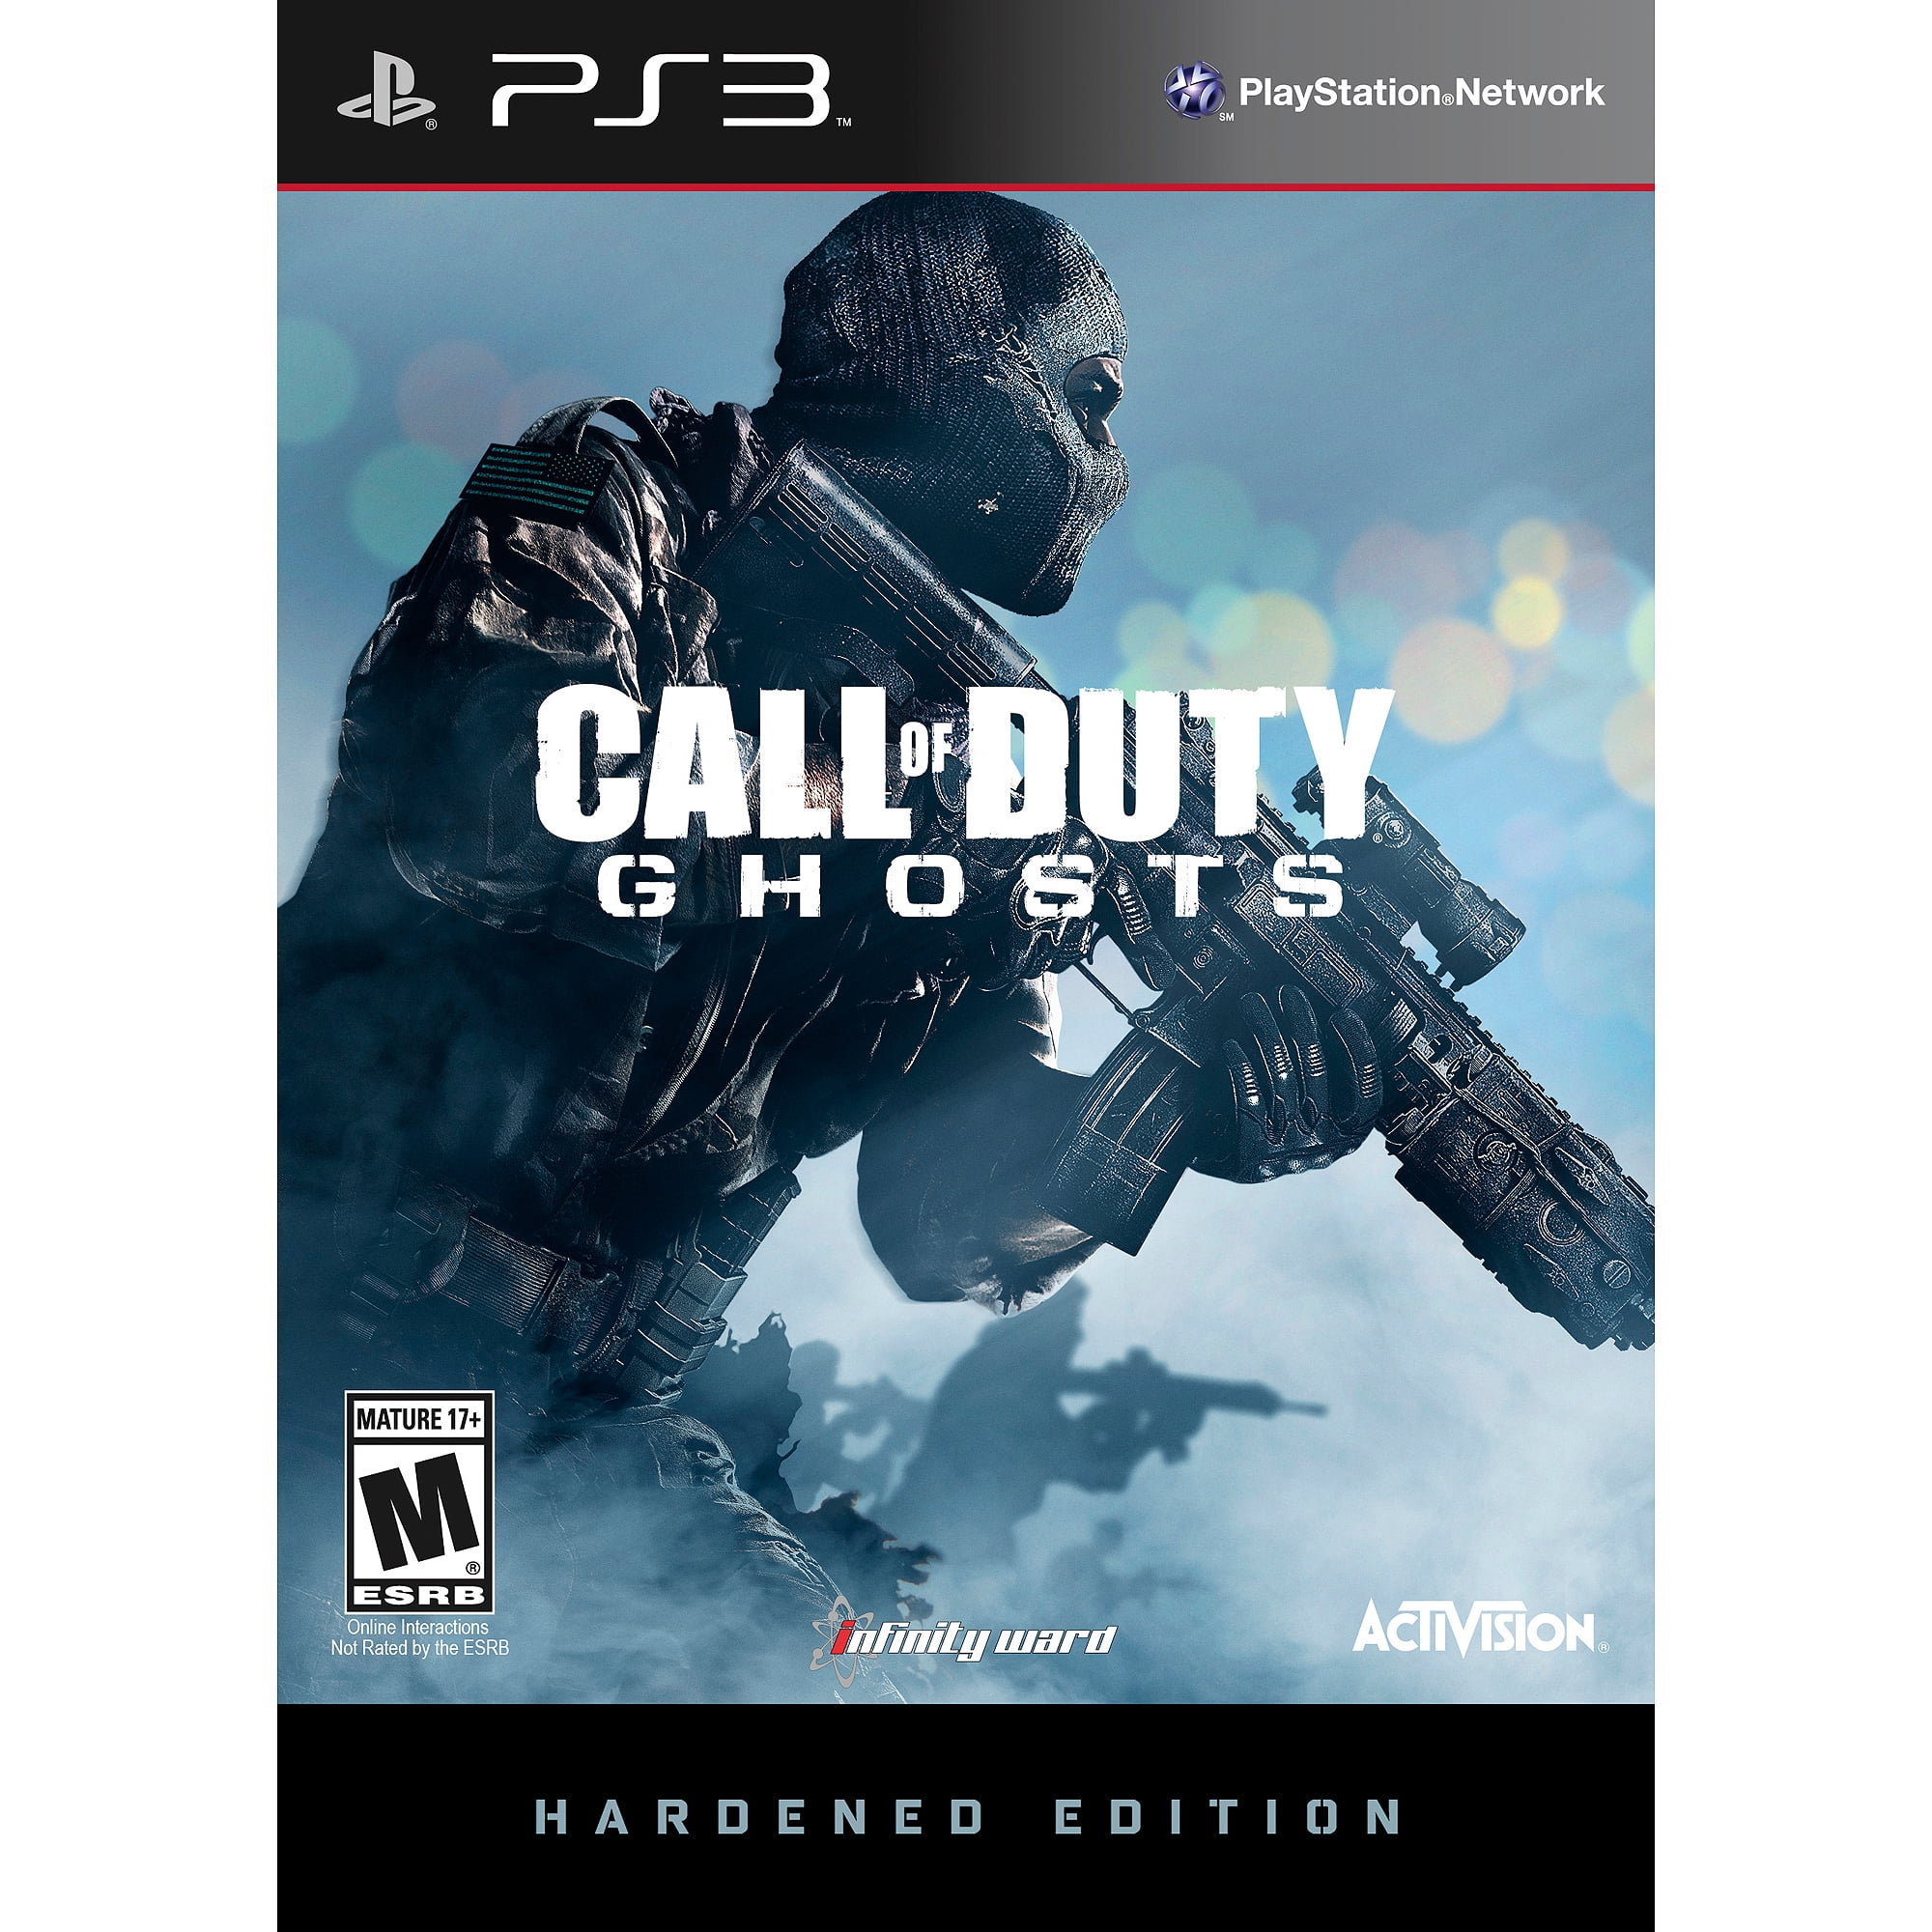 Call of Duty: Ghosts Sony PlayStation 3 PS3 Game Tested